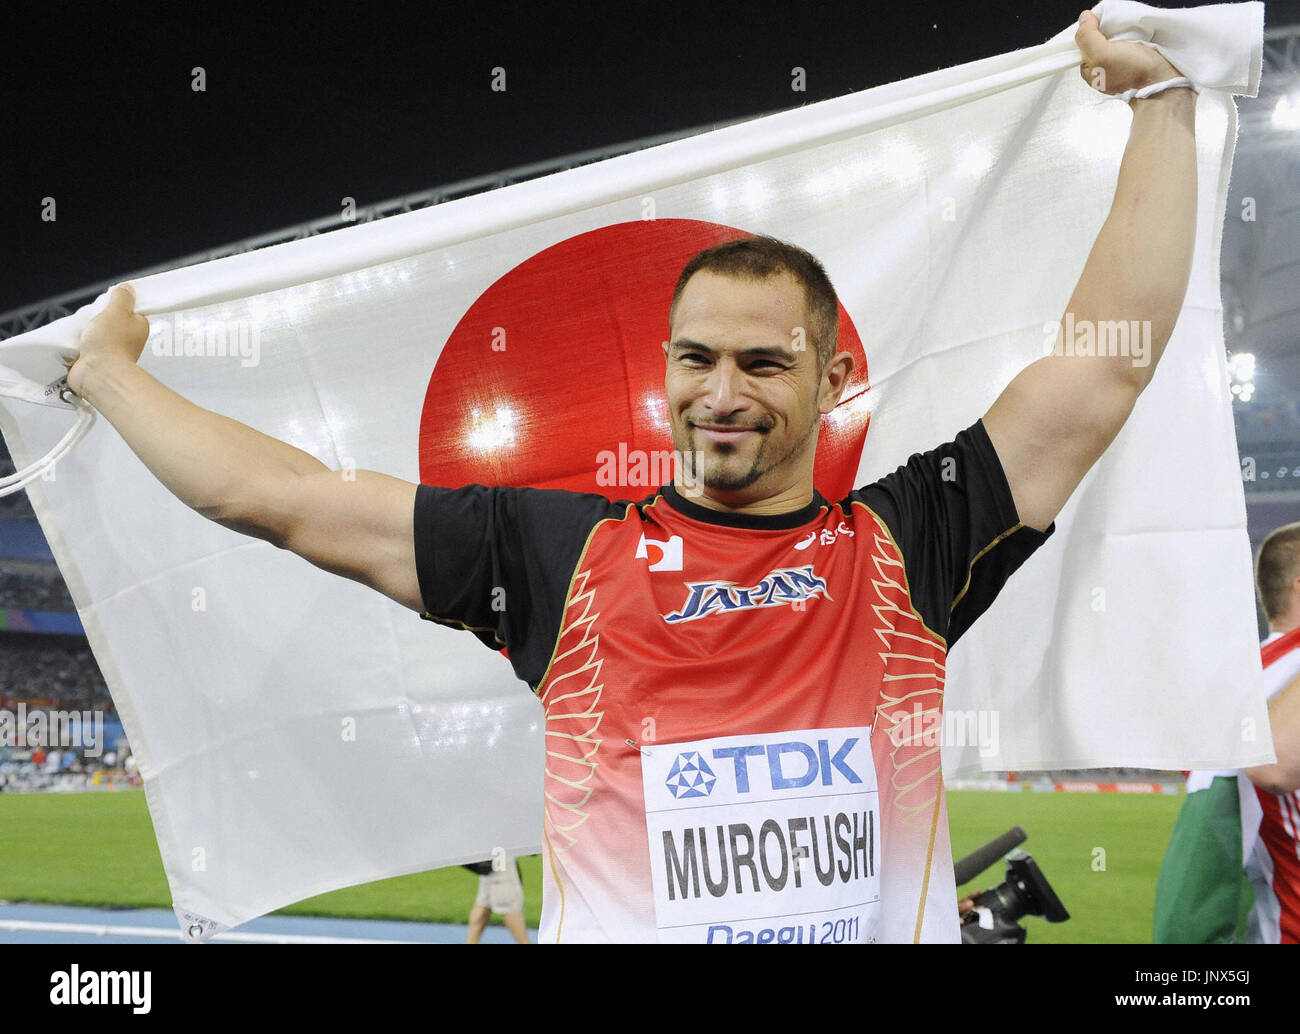 DAEGU, South Korea - Japan's Koji Murofushi, holding up a Japanese national  flag, responds to cheers after winning the gold medal in the men's hammer  throw at the world athletics championships in